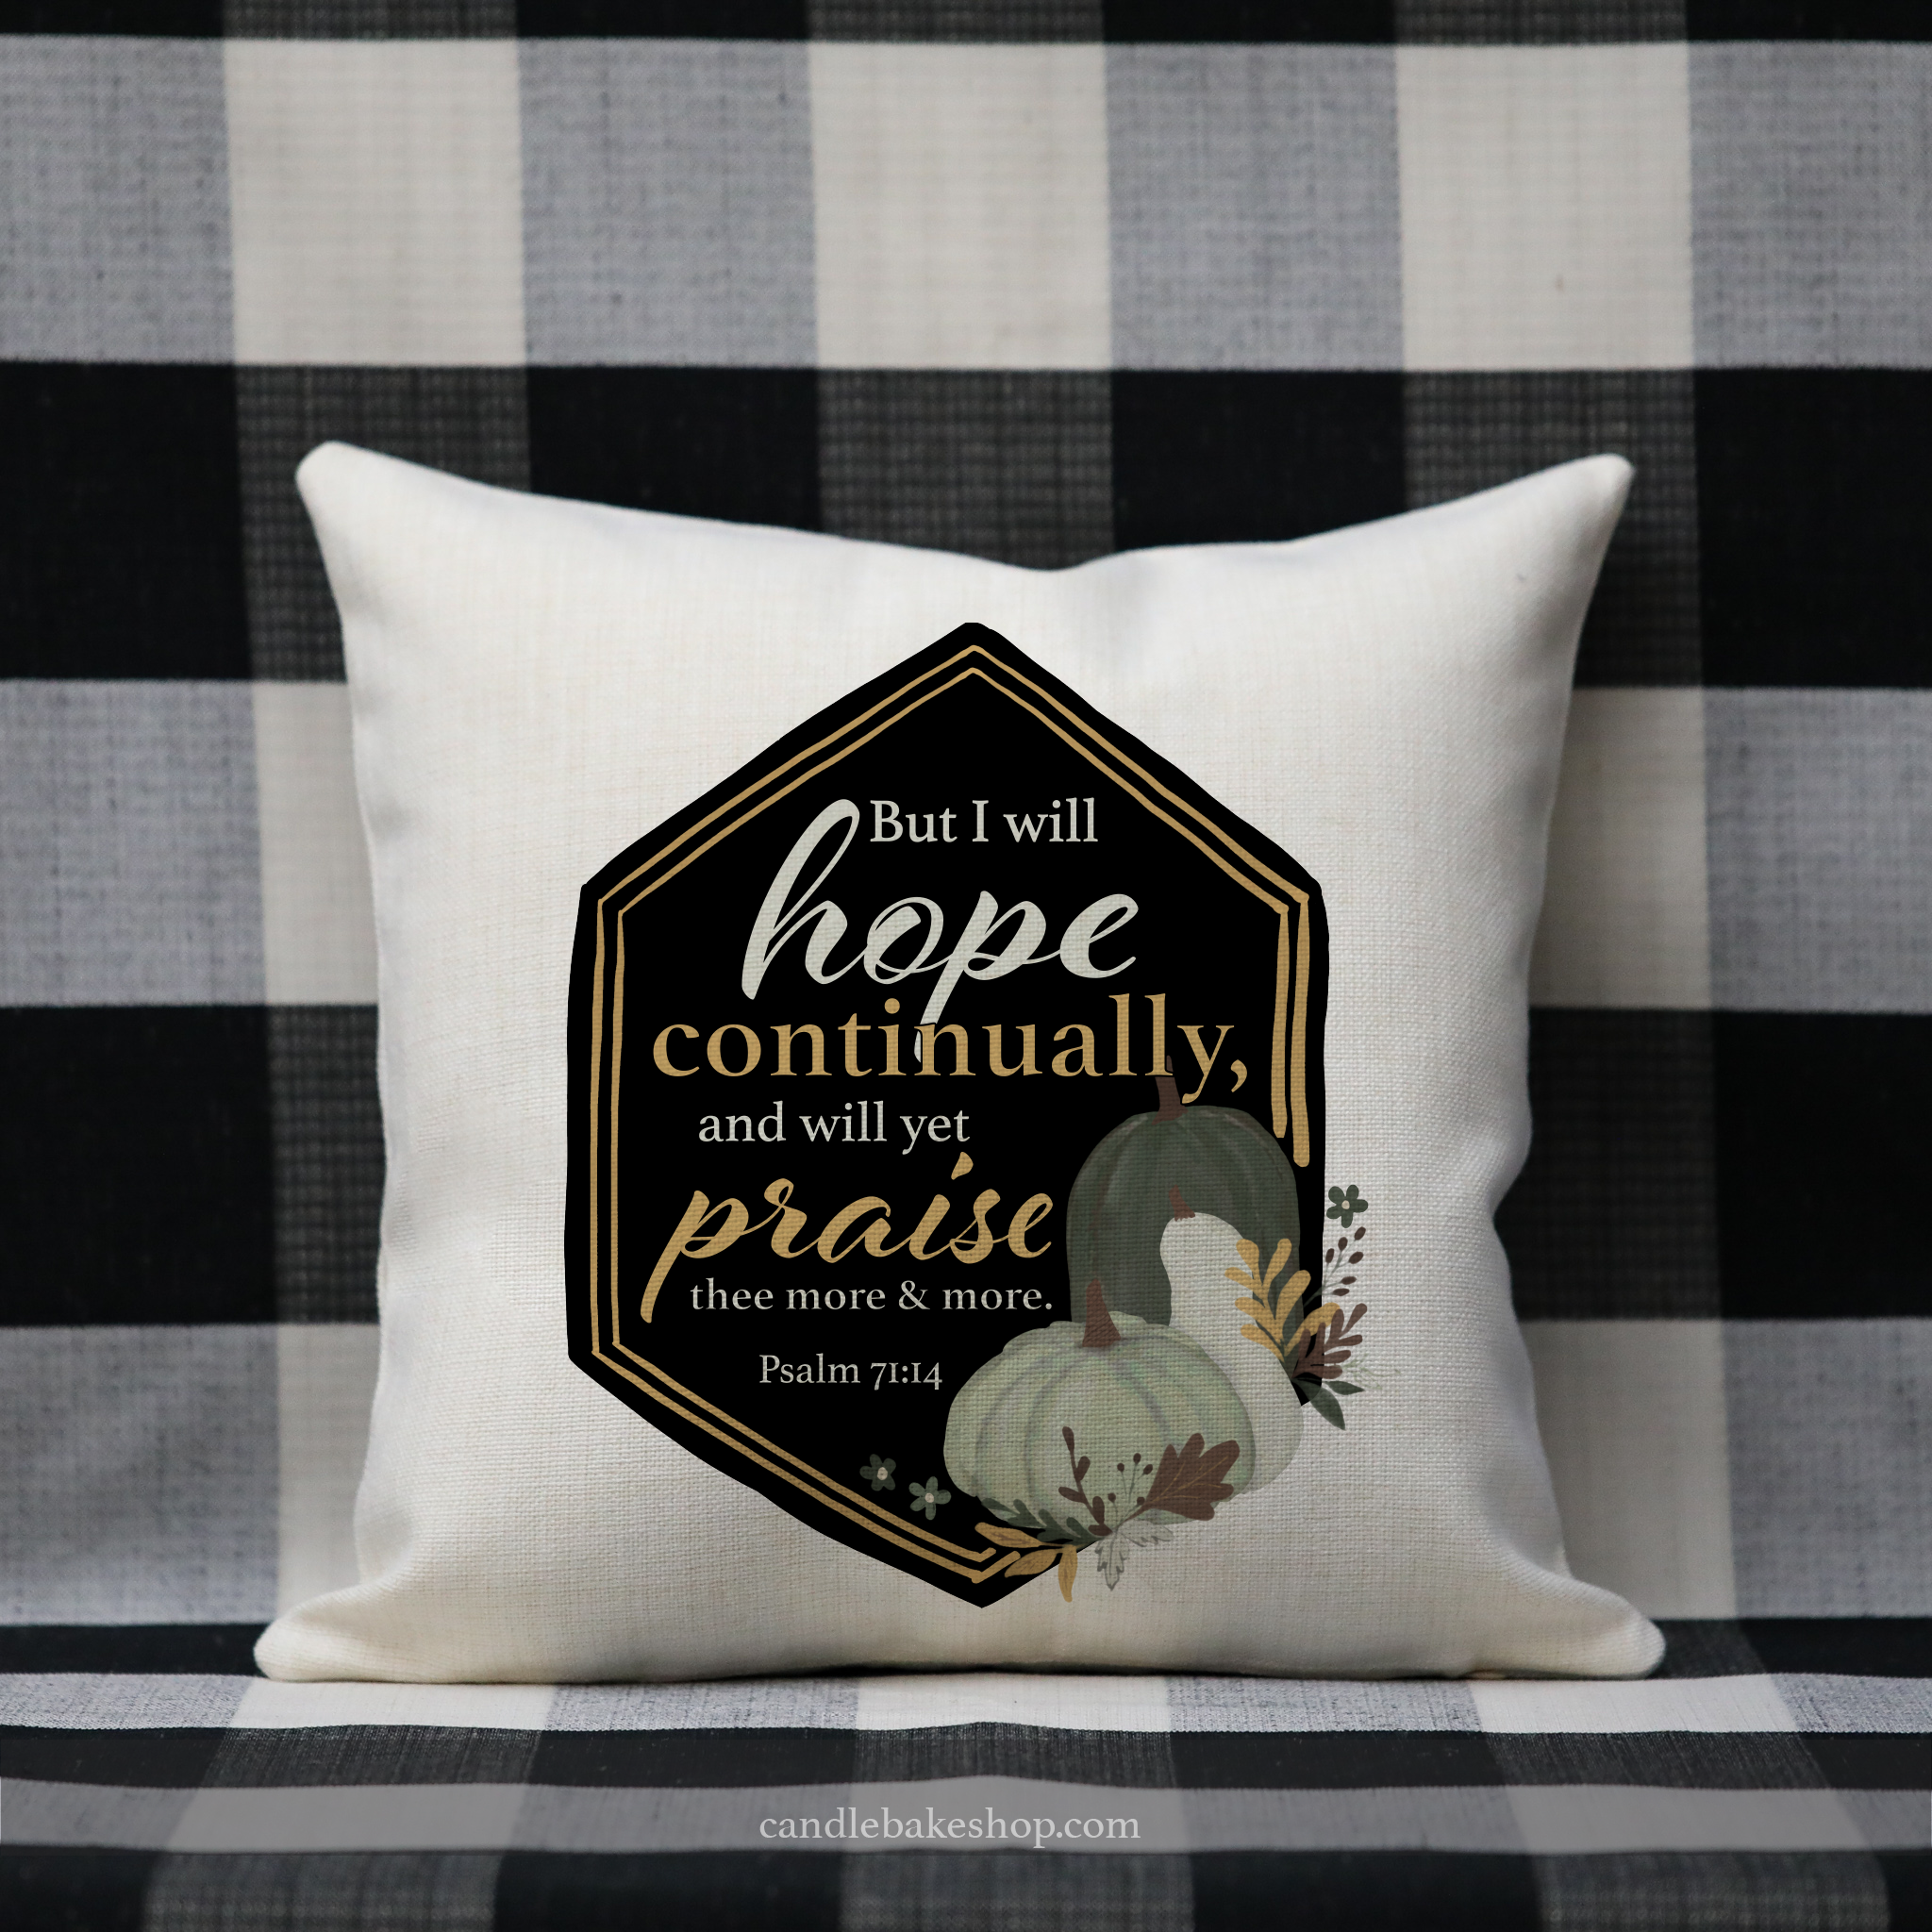 I Will Hope Continually Scripture Pillow - Psalm 71:14